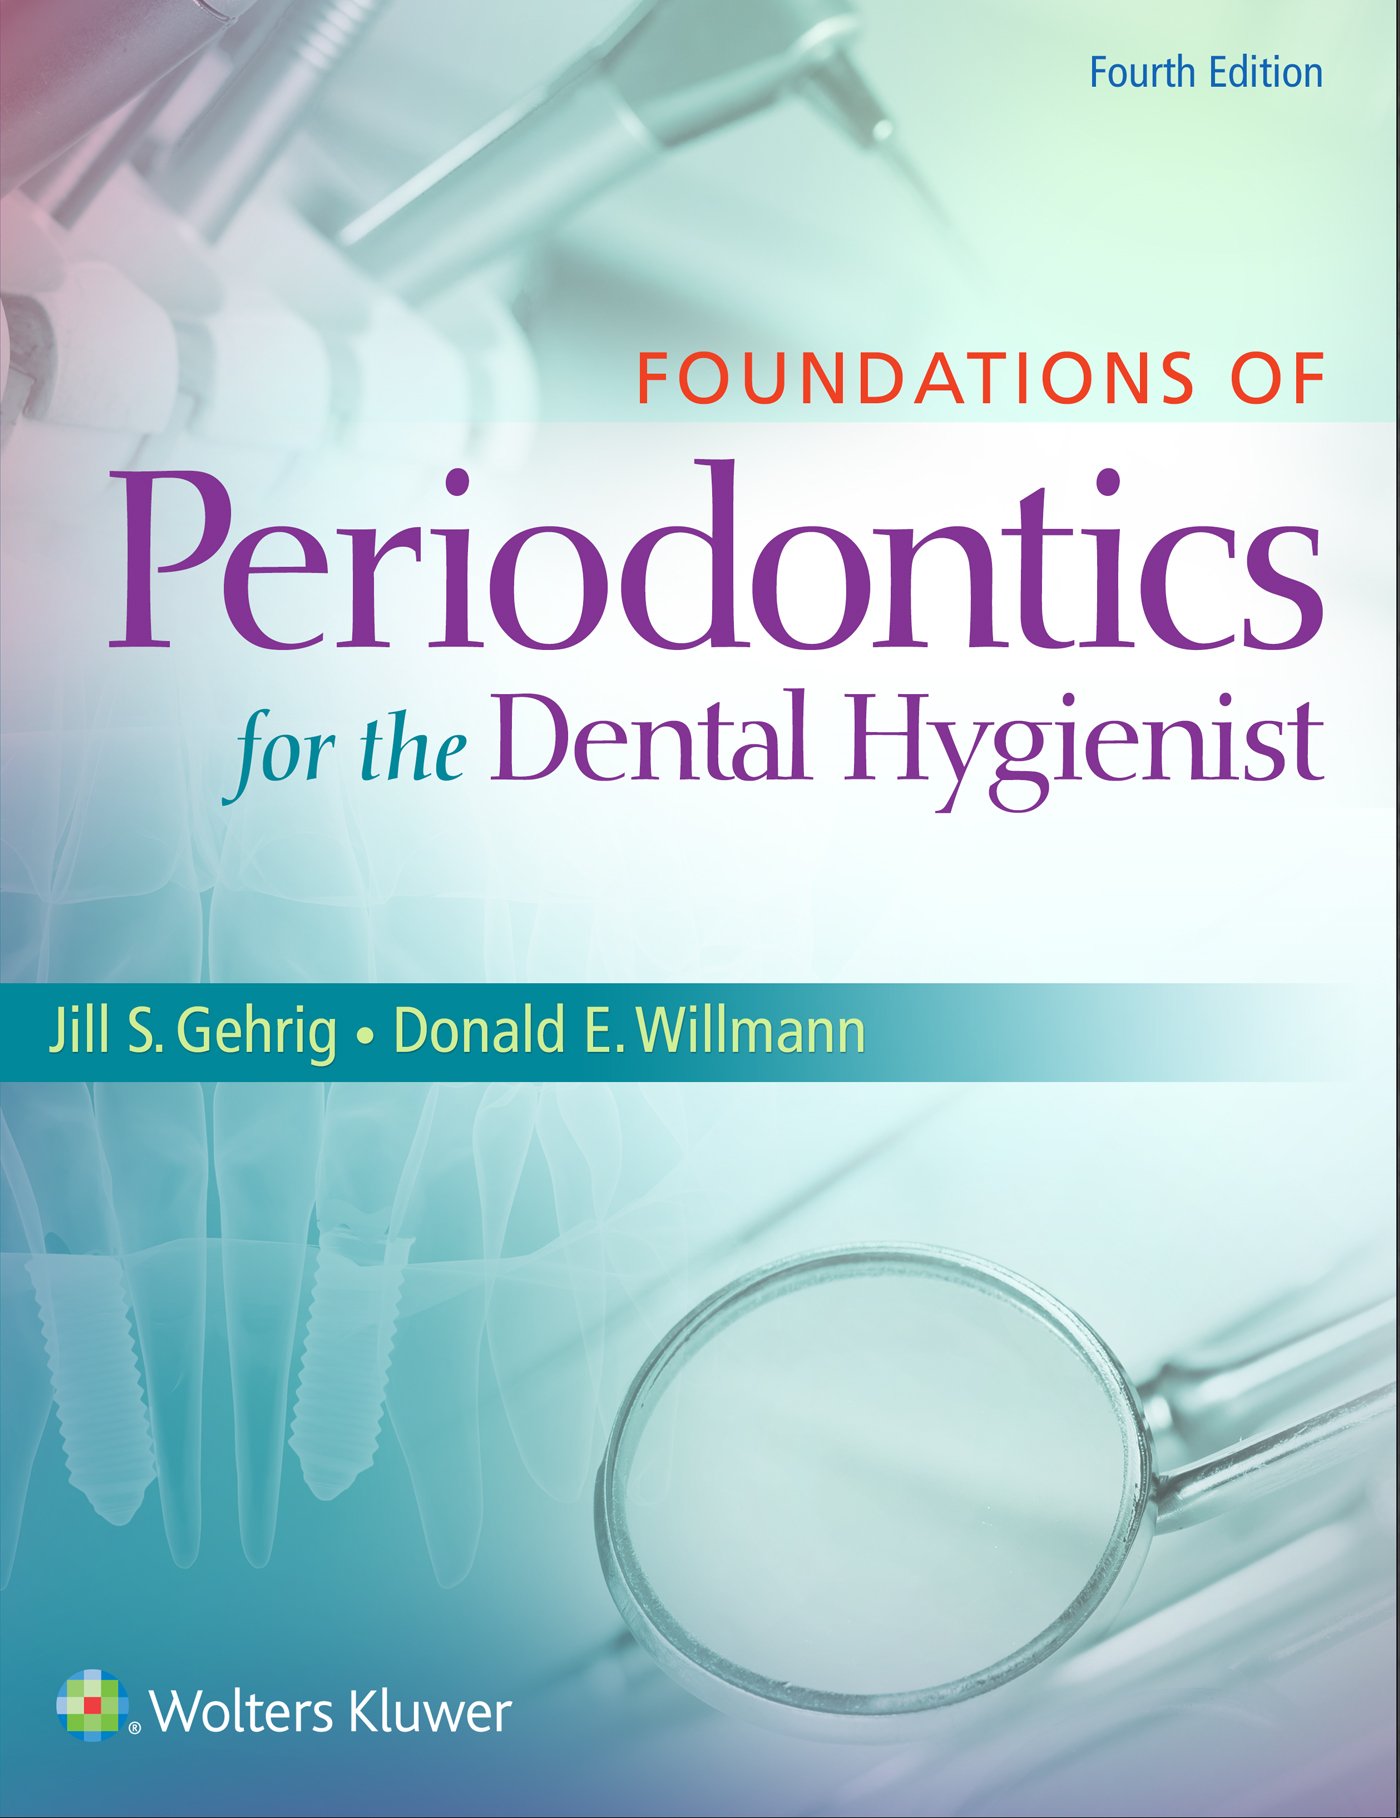 Foundations Of Periodontics For The Dental Hygienist(Old Edition)